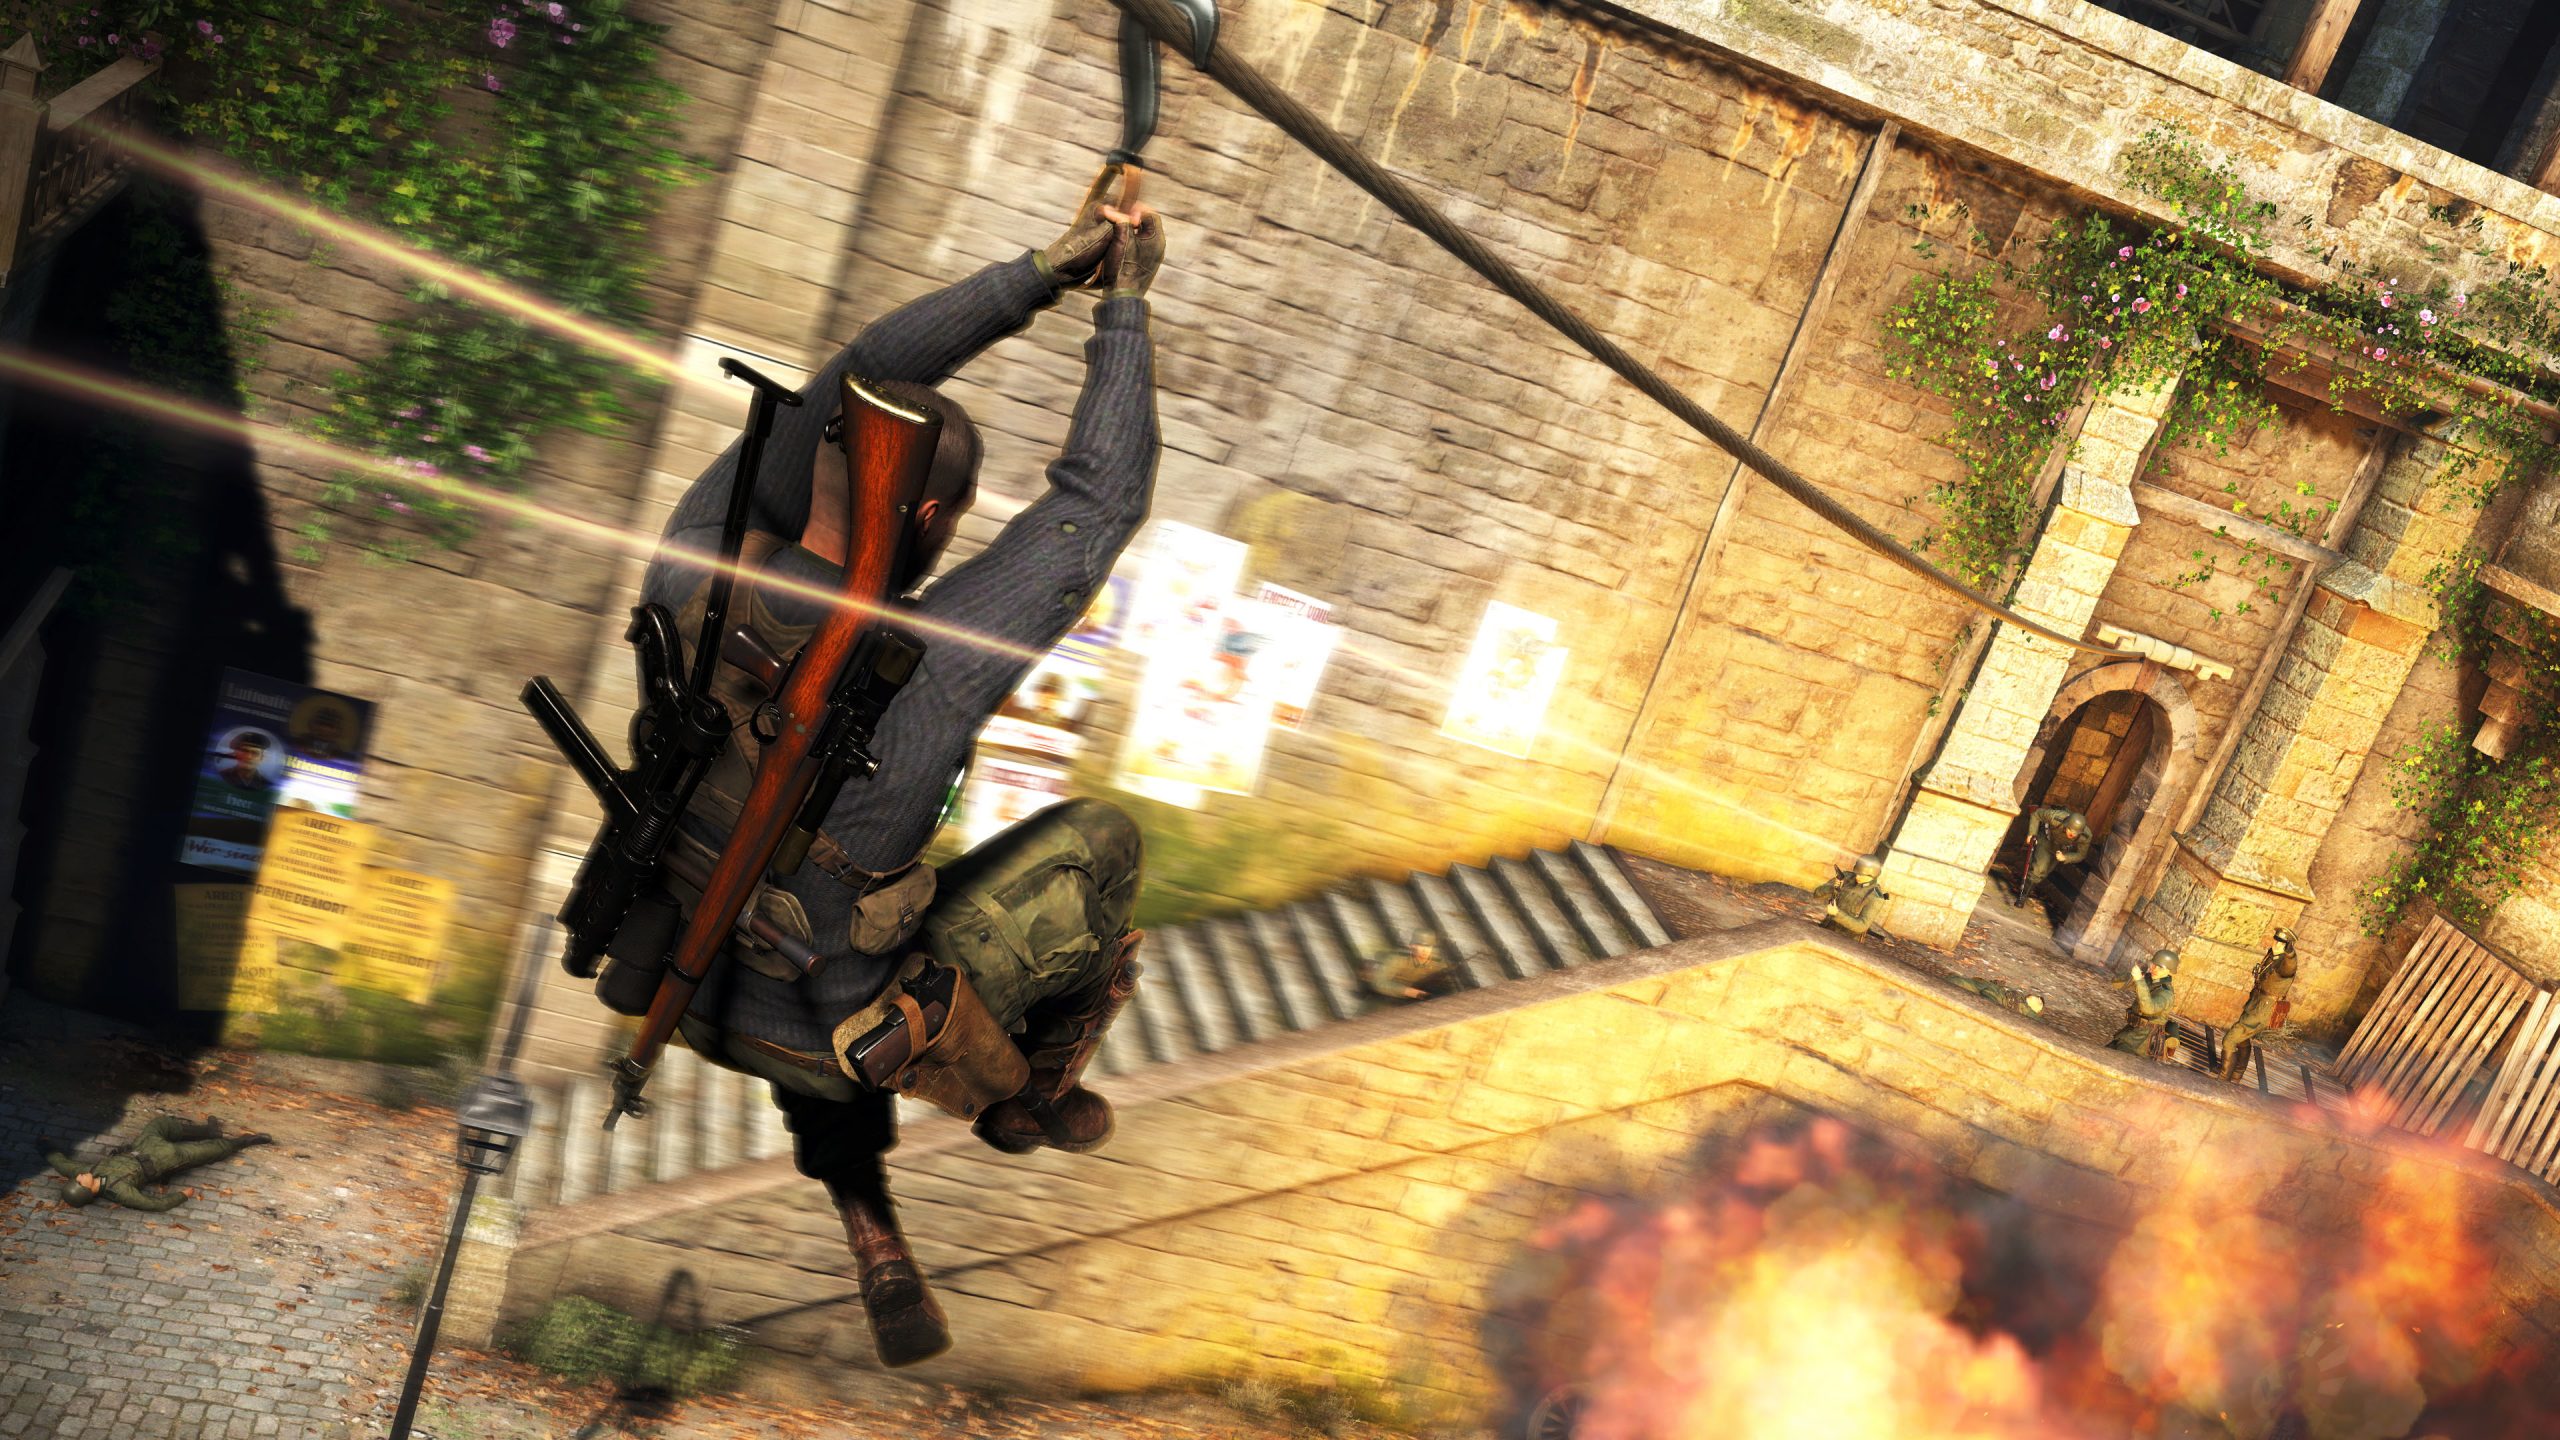 A screenshot from Sniper Elite 5. A man with a buzzcut, wearing a blue shirt and camo pants with two guns strapped to his back, zips down a zipline towards three men in camo pointing guns at him. Two other men appear to be running. Another lies motionless on the ground.